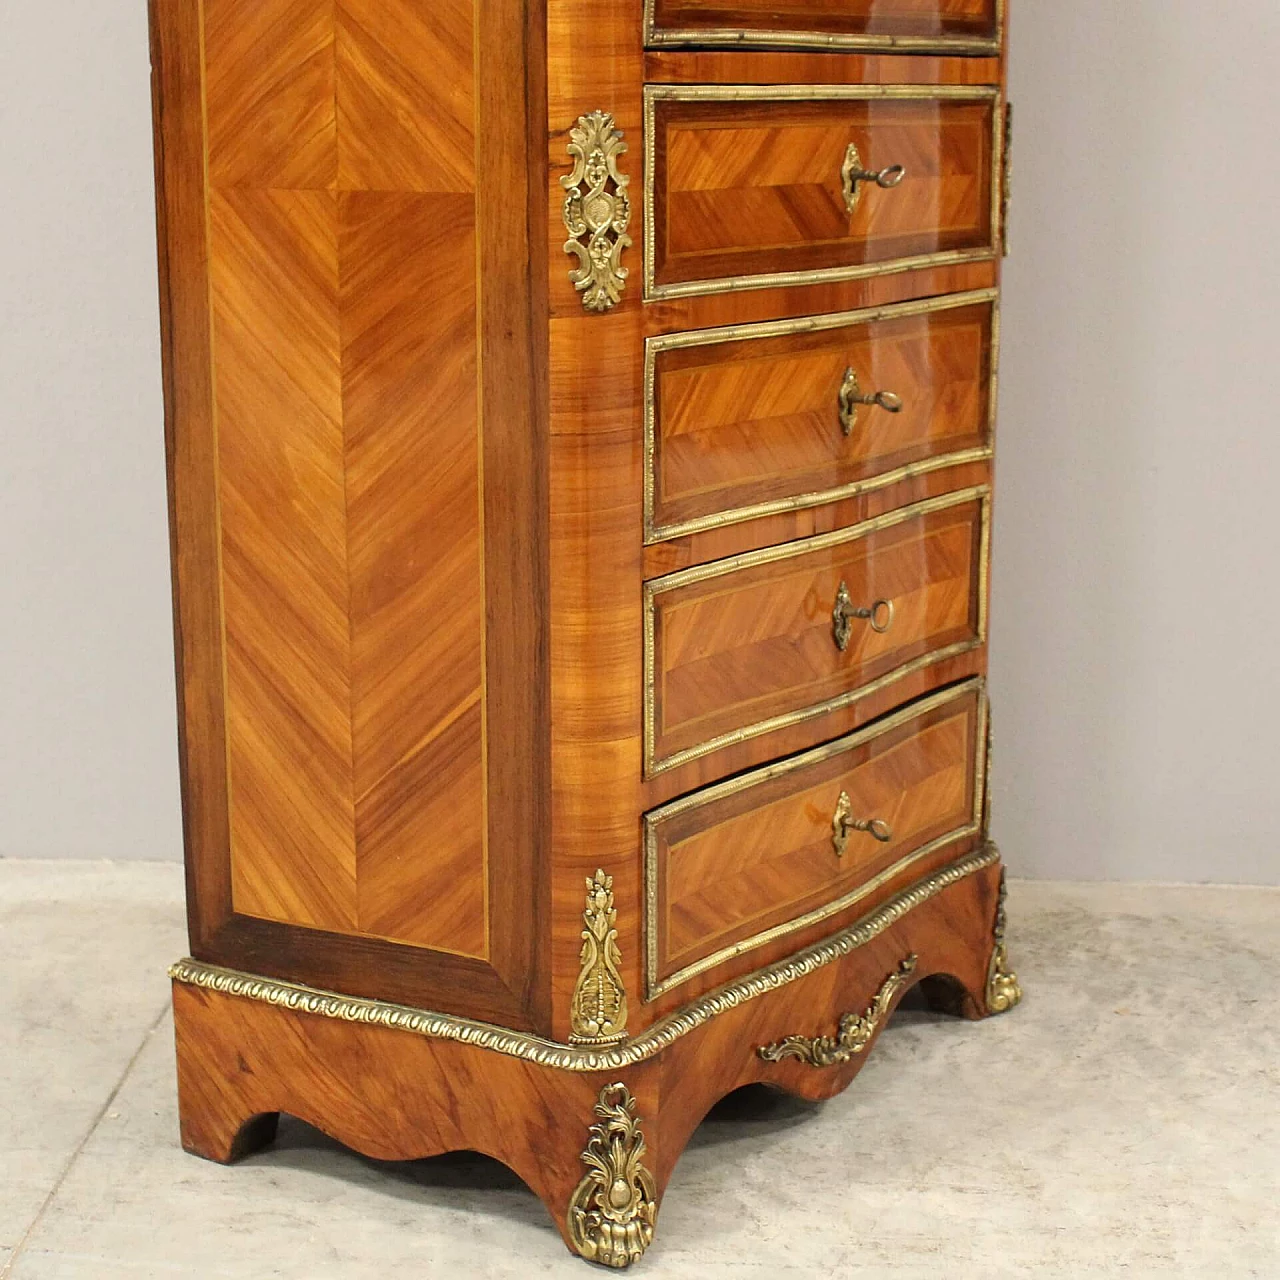 Napoleon III secretaire in bois de rose, rosewood inlay and gilded bronze with marble top, 19th century 7